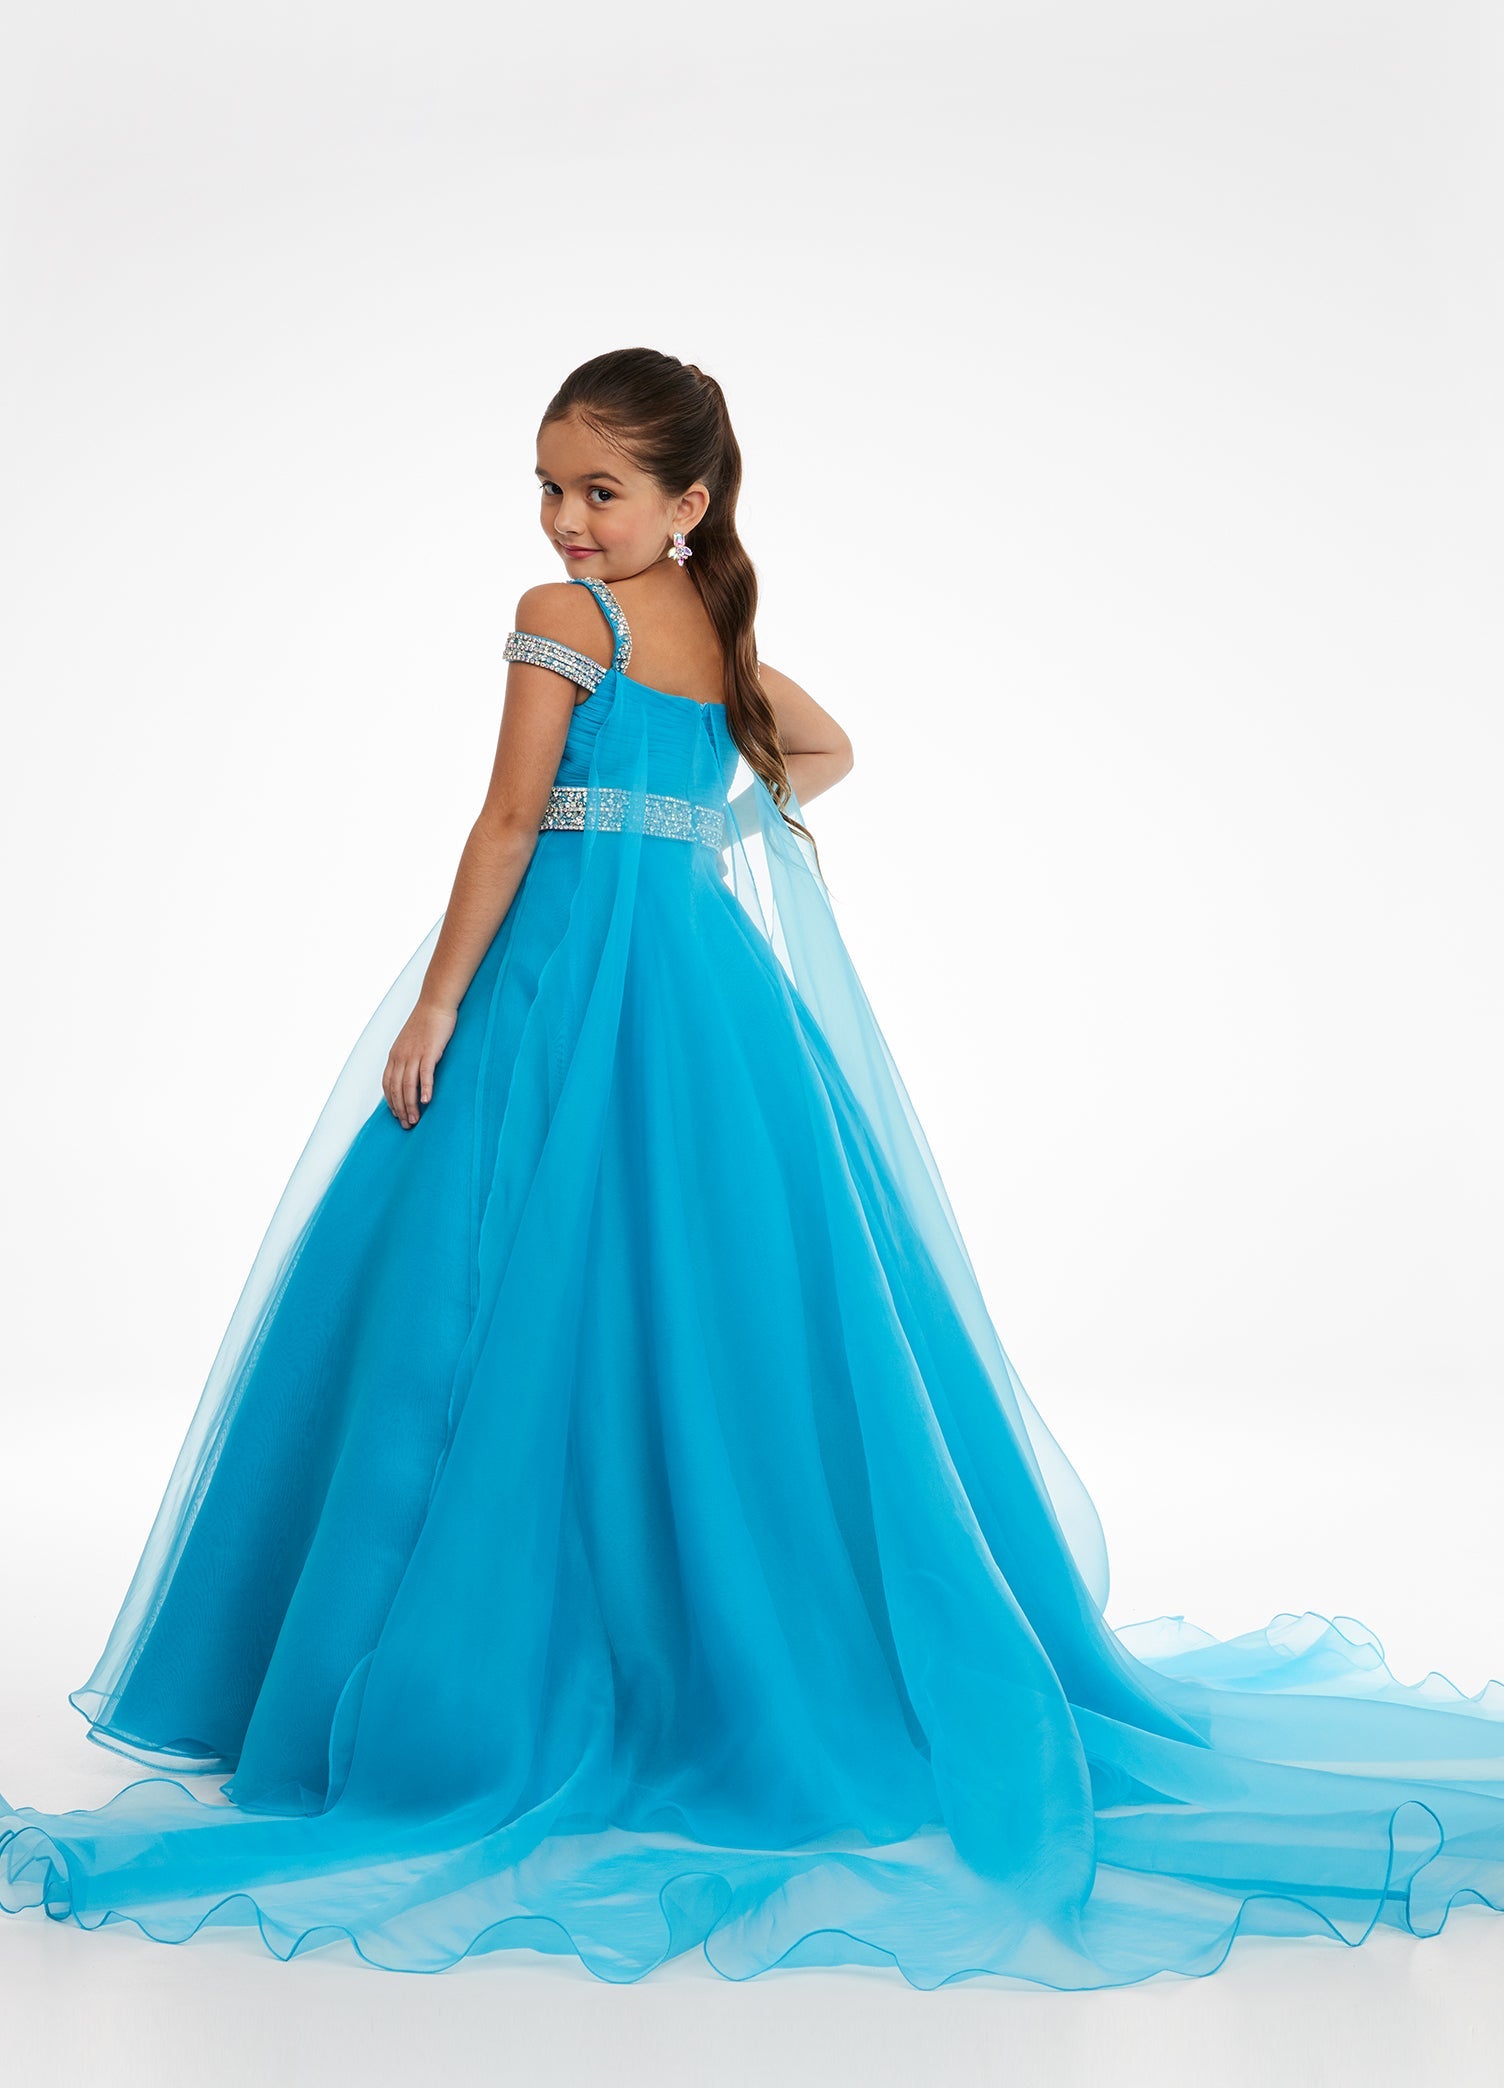 Ashley Lauren Kids 8094 Long off the shoulder A Line Pageant Ball Gown Pageant Dress We are obsessed with this kids evening gown! This organza ball gown features crystal encrusted straps giving way to a ruched bustier. The same crystal detail accents the elegant beaded belt. The look is completed with an A-Line skirt and attached organza cape. Ruched Bustier Crystal Strap &amp; Belt Organza Ball Gown Skirt Organza Cape Available Sizes: 4-14 Available Colors: Neon Orange, Orchid, Hot Pink, Turquoise, Ivory